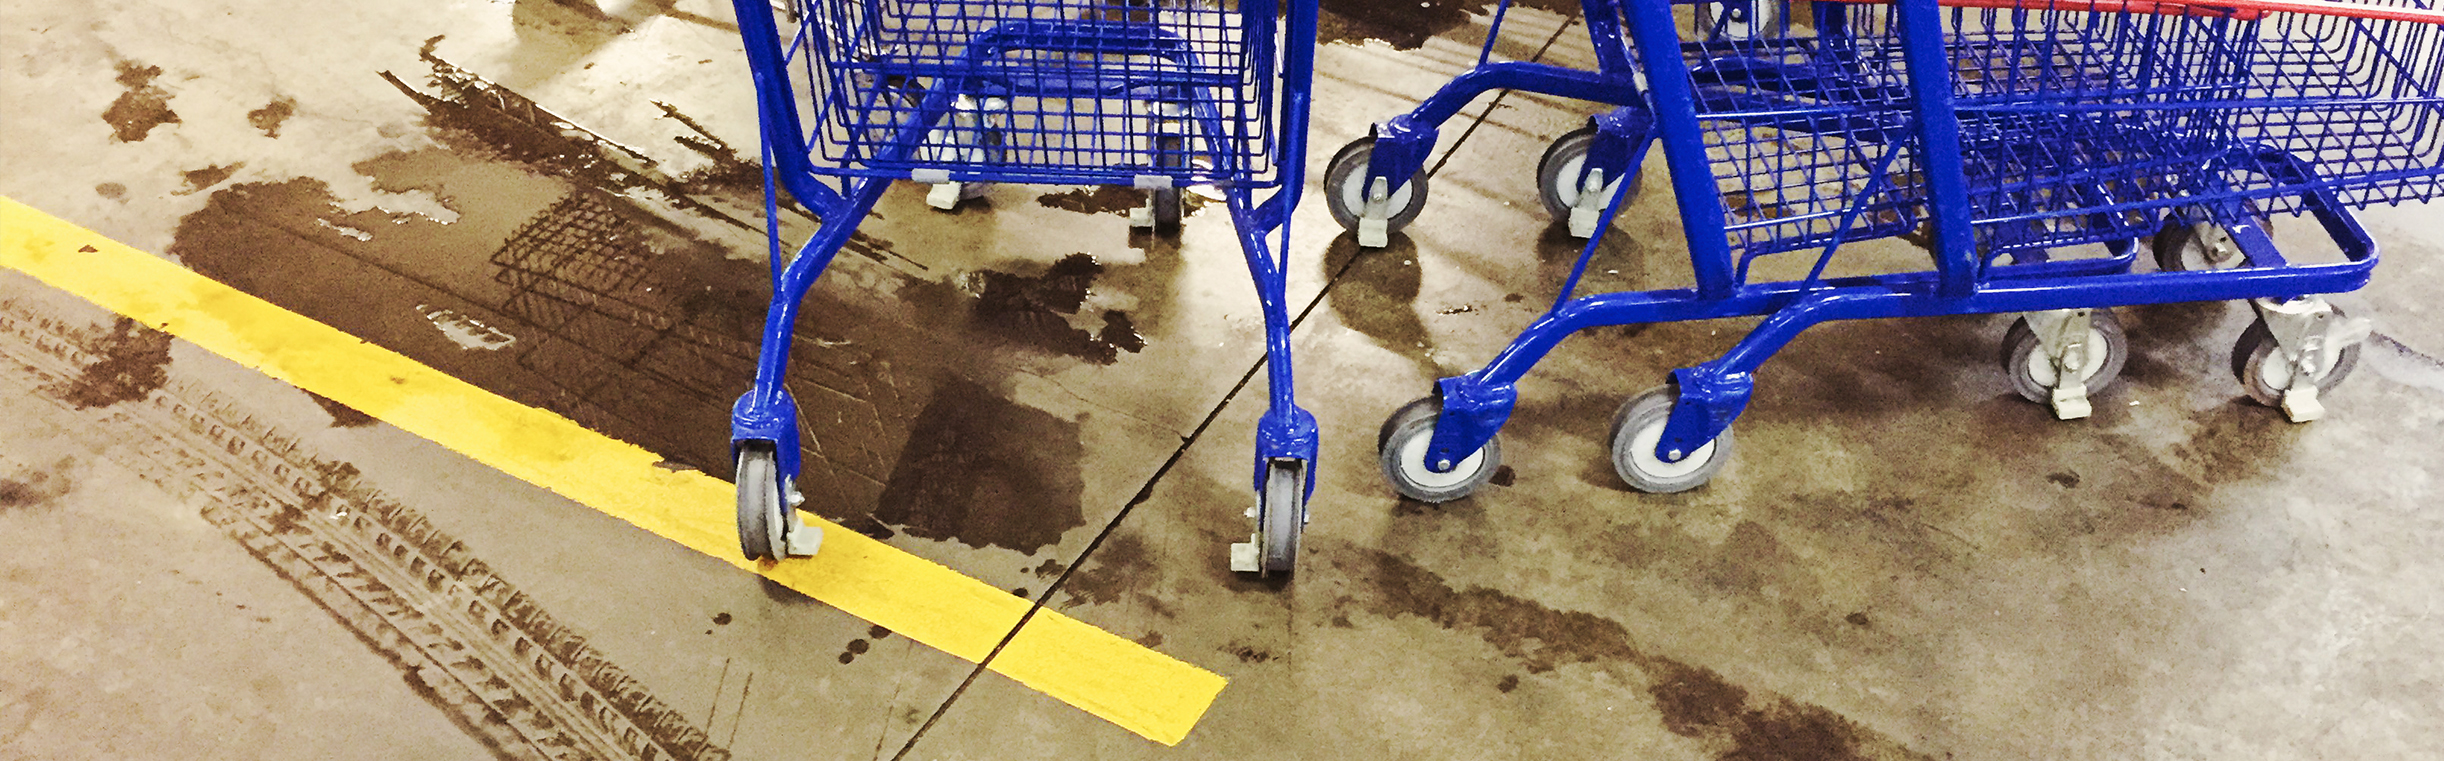 Wet and dirty floor at supermarket carts area produces a liability.